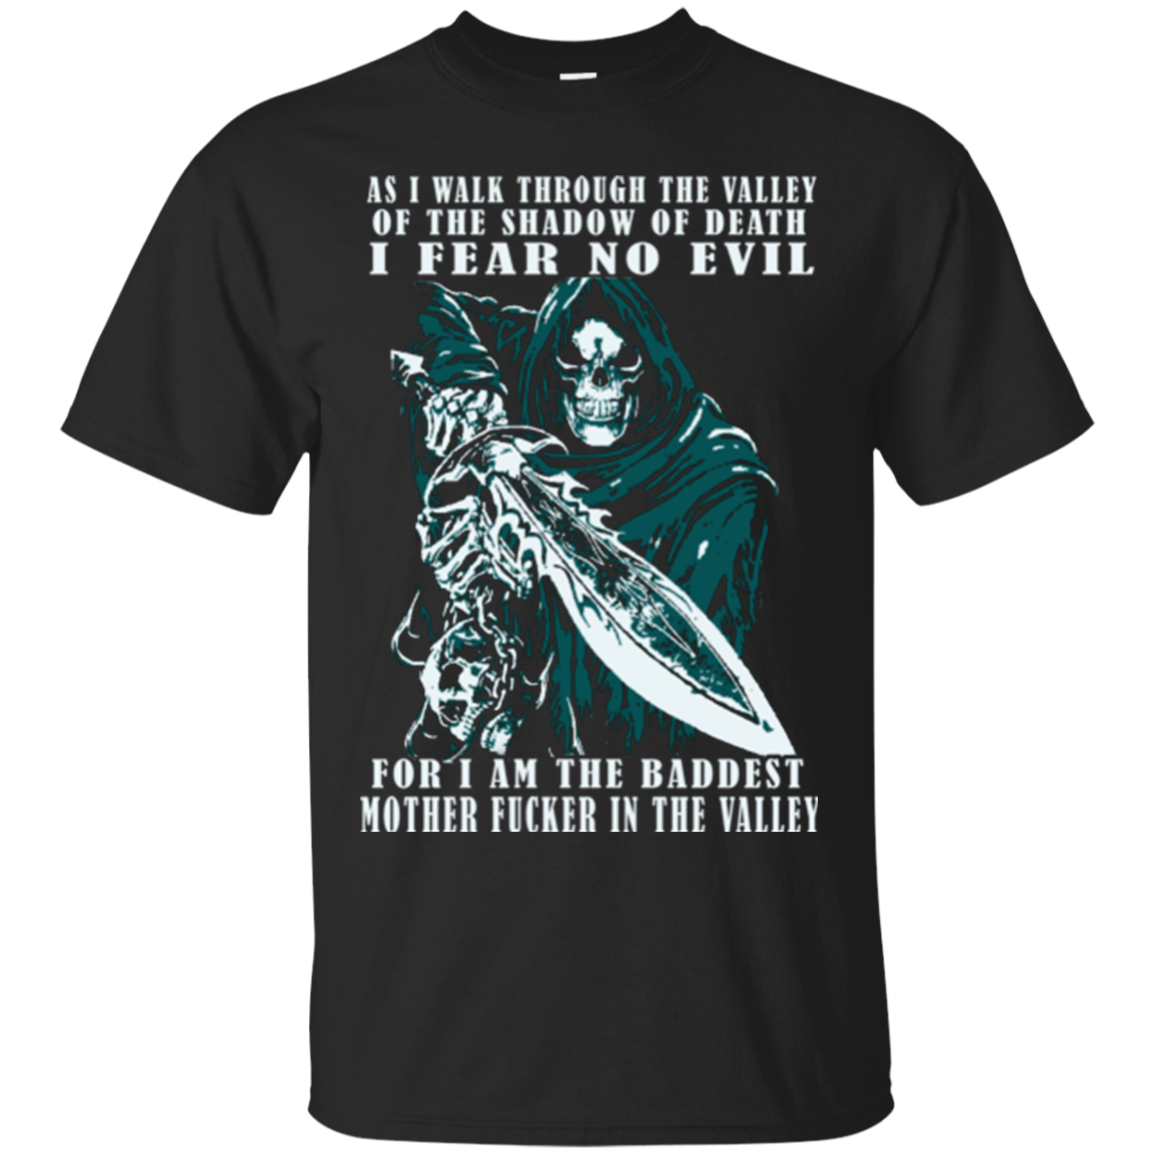 Jarhead Shirts As I Walk Through The Valley I Fear No Evil For I Am The ...